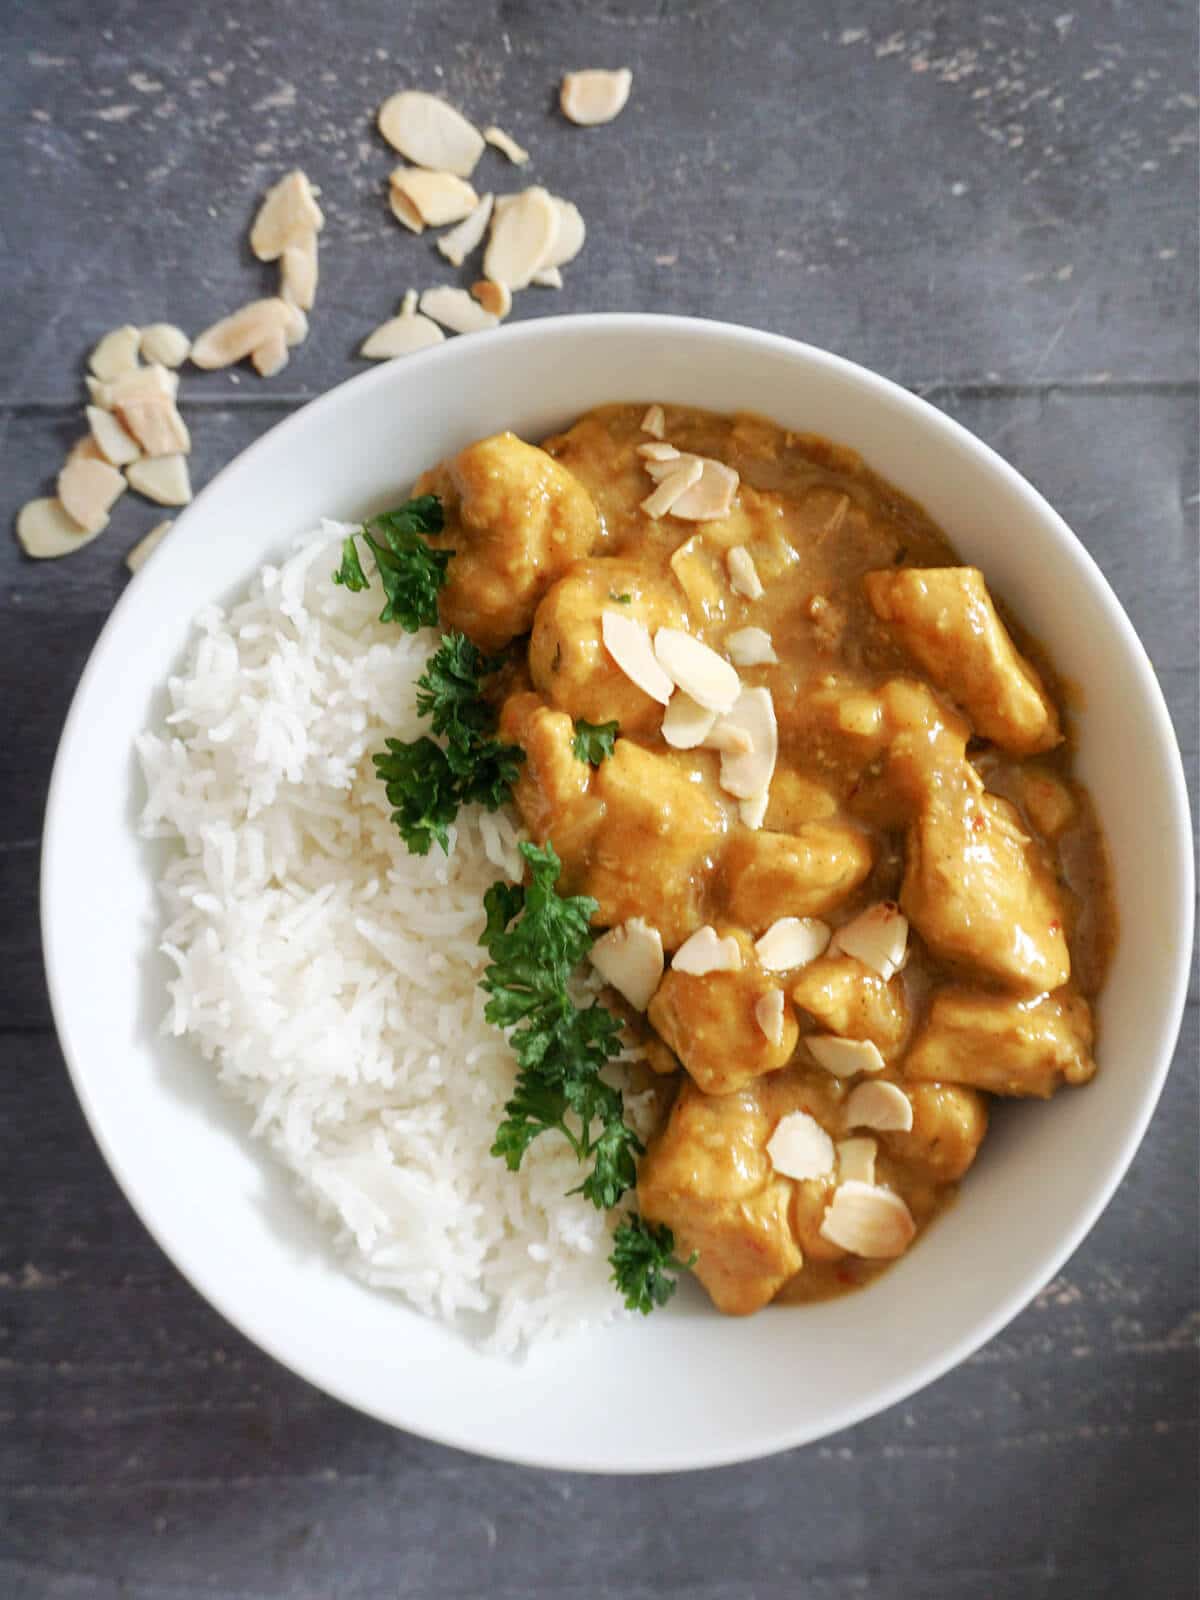 Overhead shoot of a white bowl with rice, chicken curry and parsley, with almonds scattered around